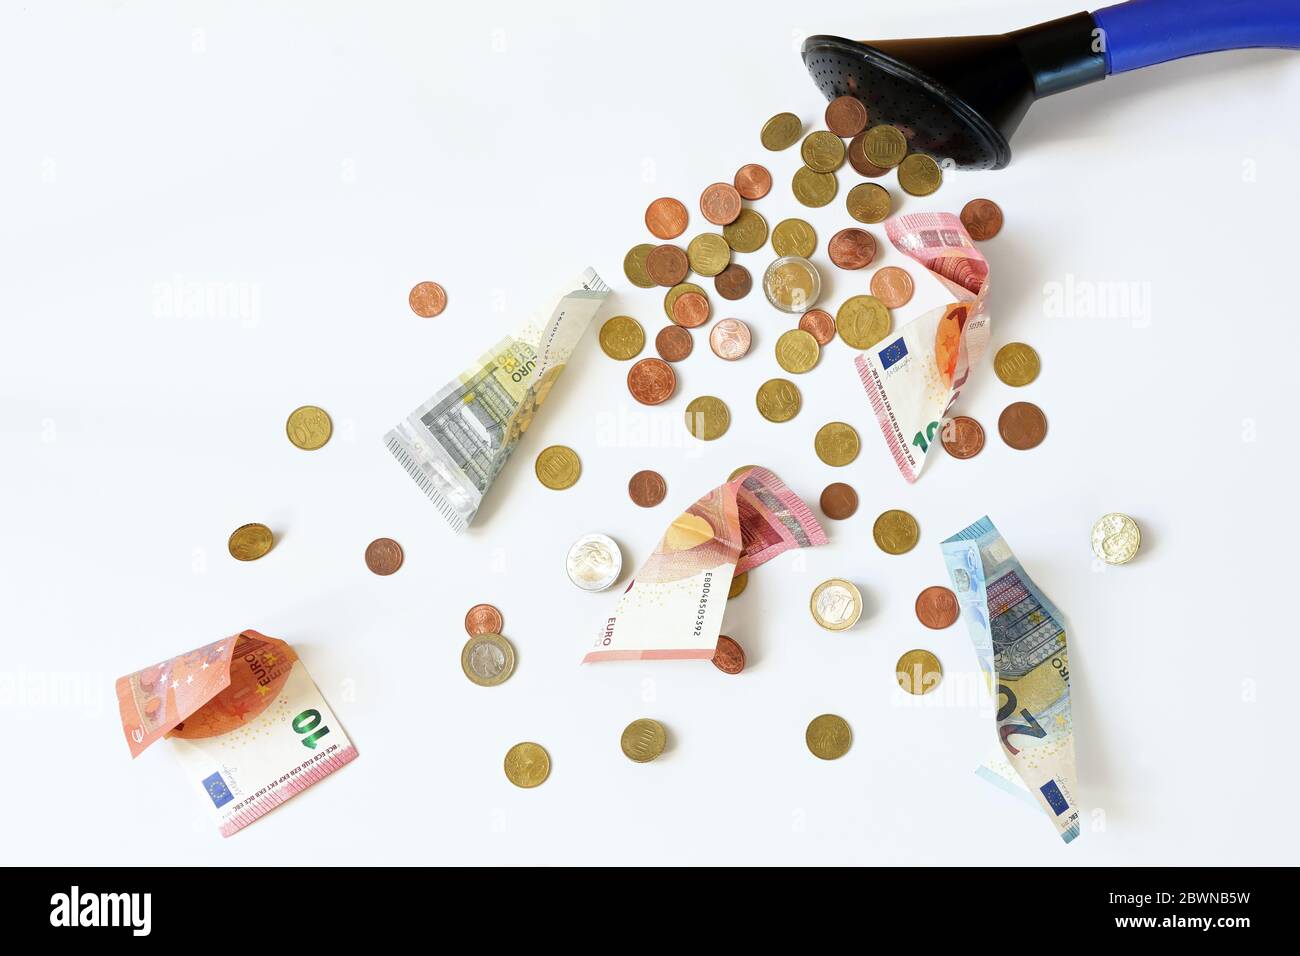 Euro coins and banknotes flow out of a watering can, financial principle to dump money at random, subsidies and grants that are distributed too thinly Stock Photo